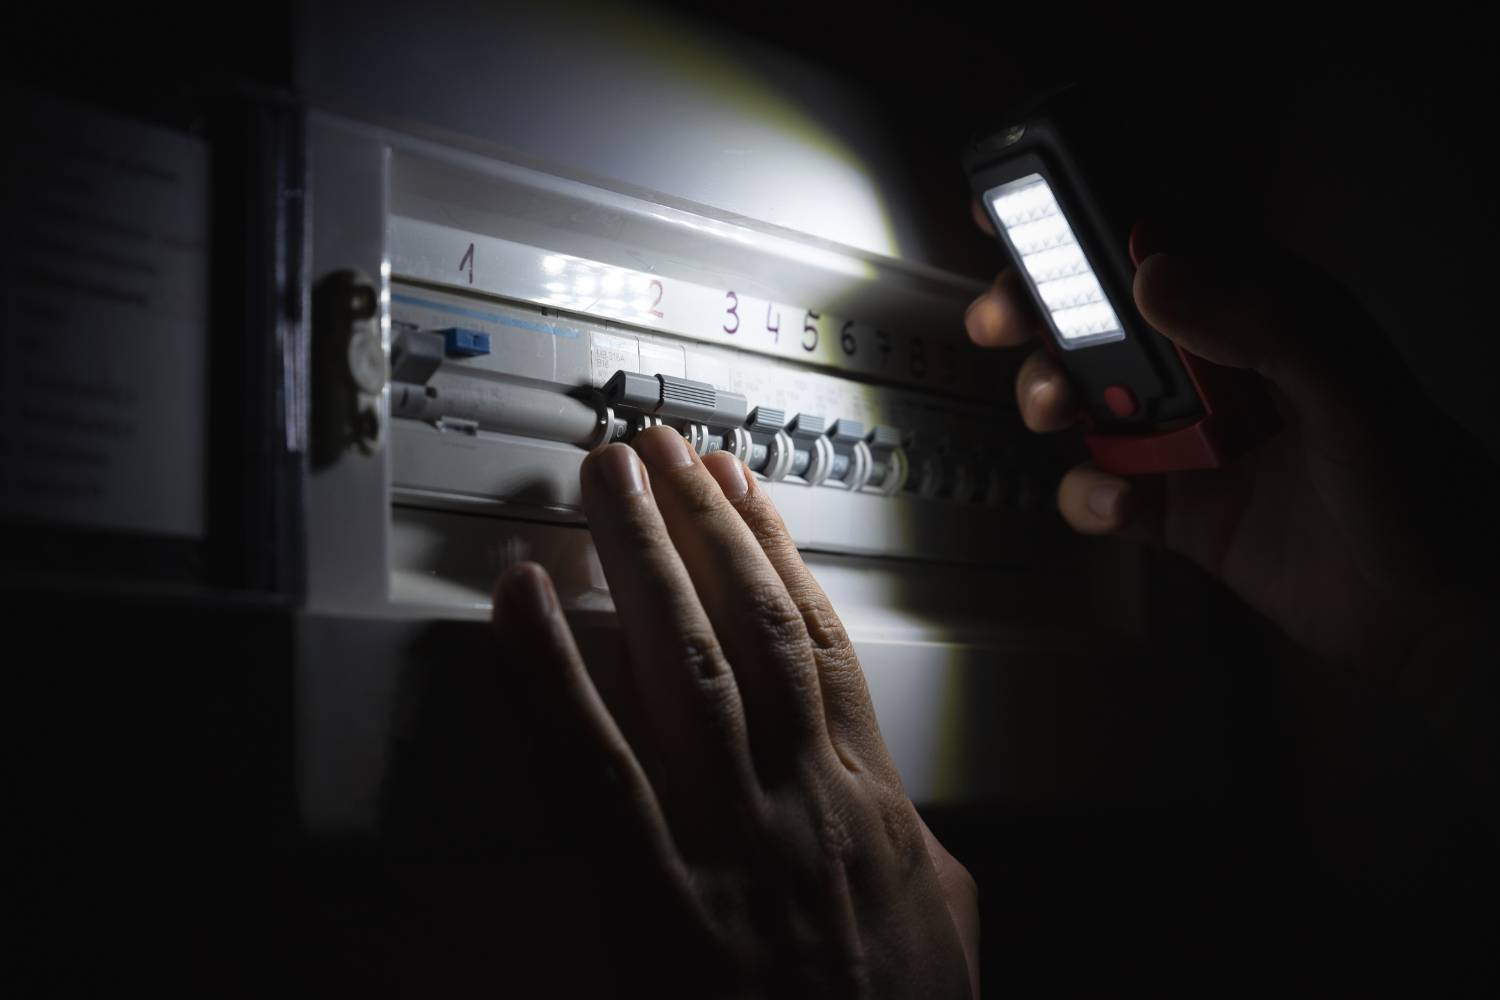 what should i do in case of a power outage or system malfunction 2